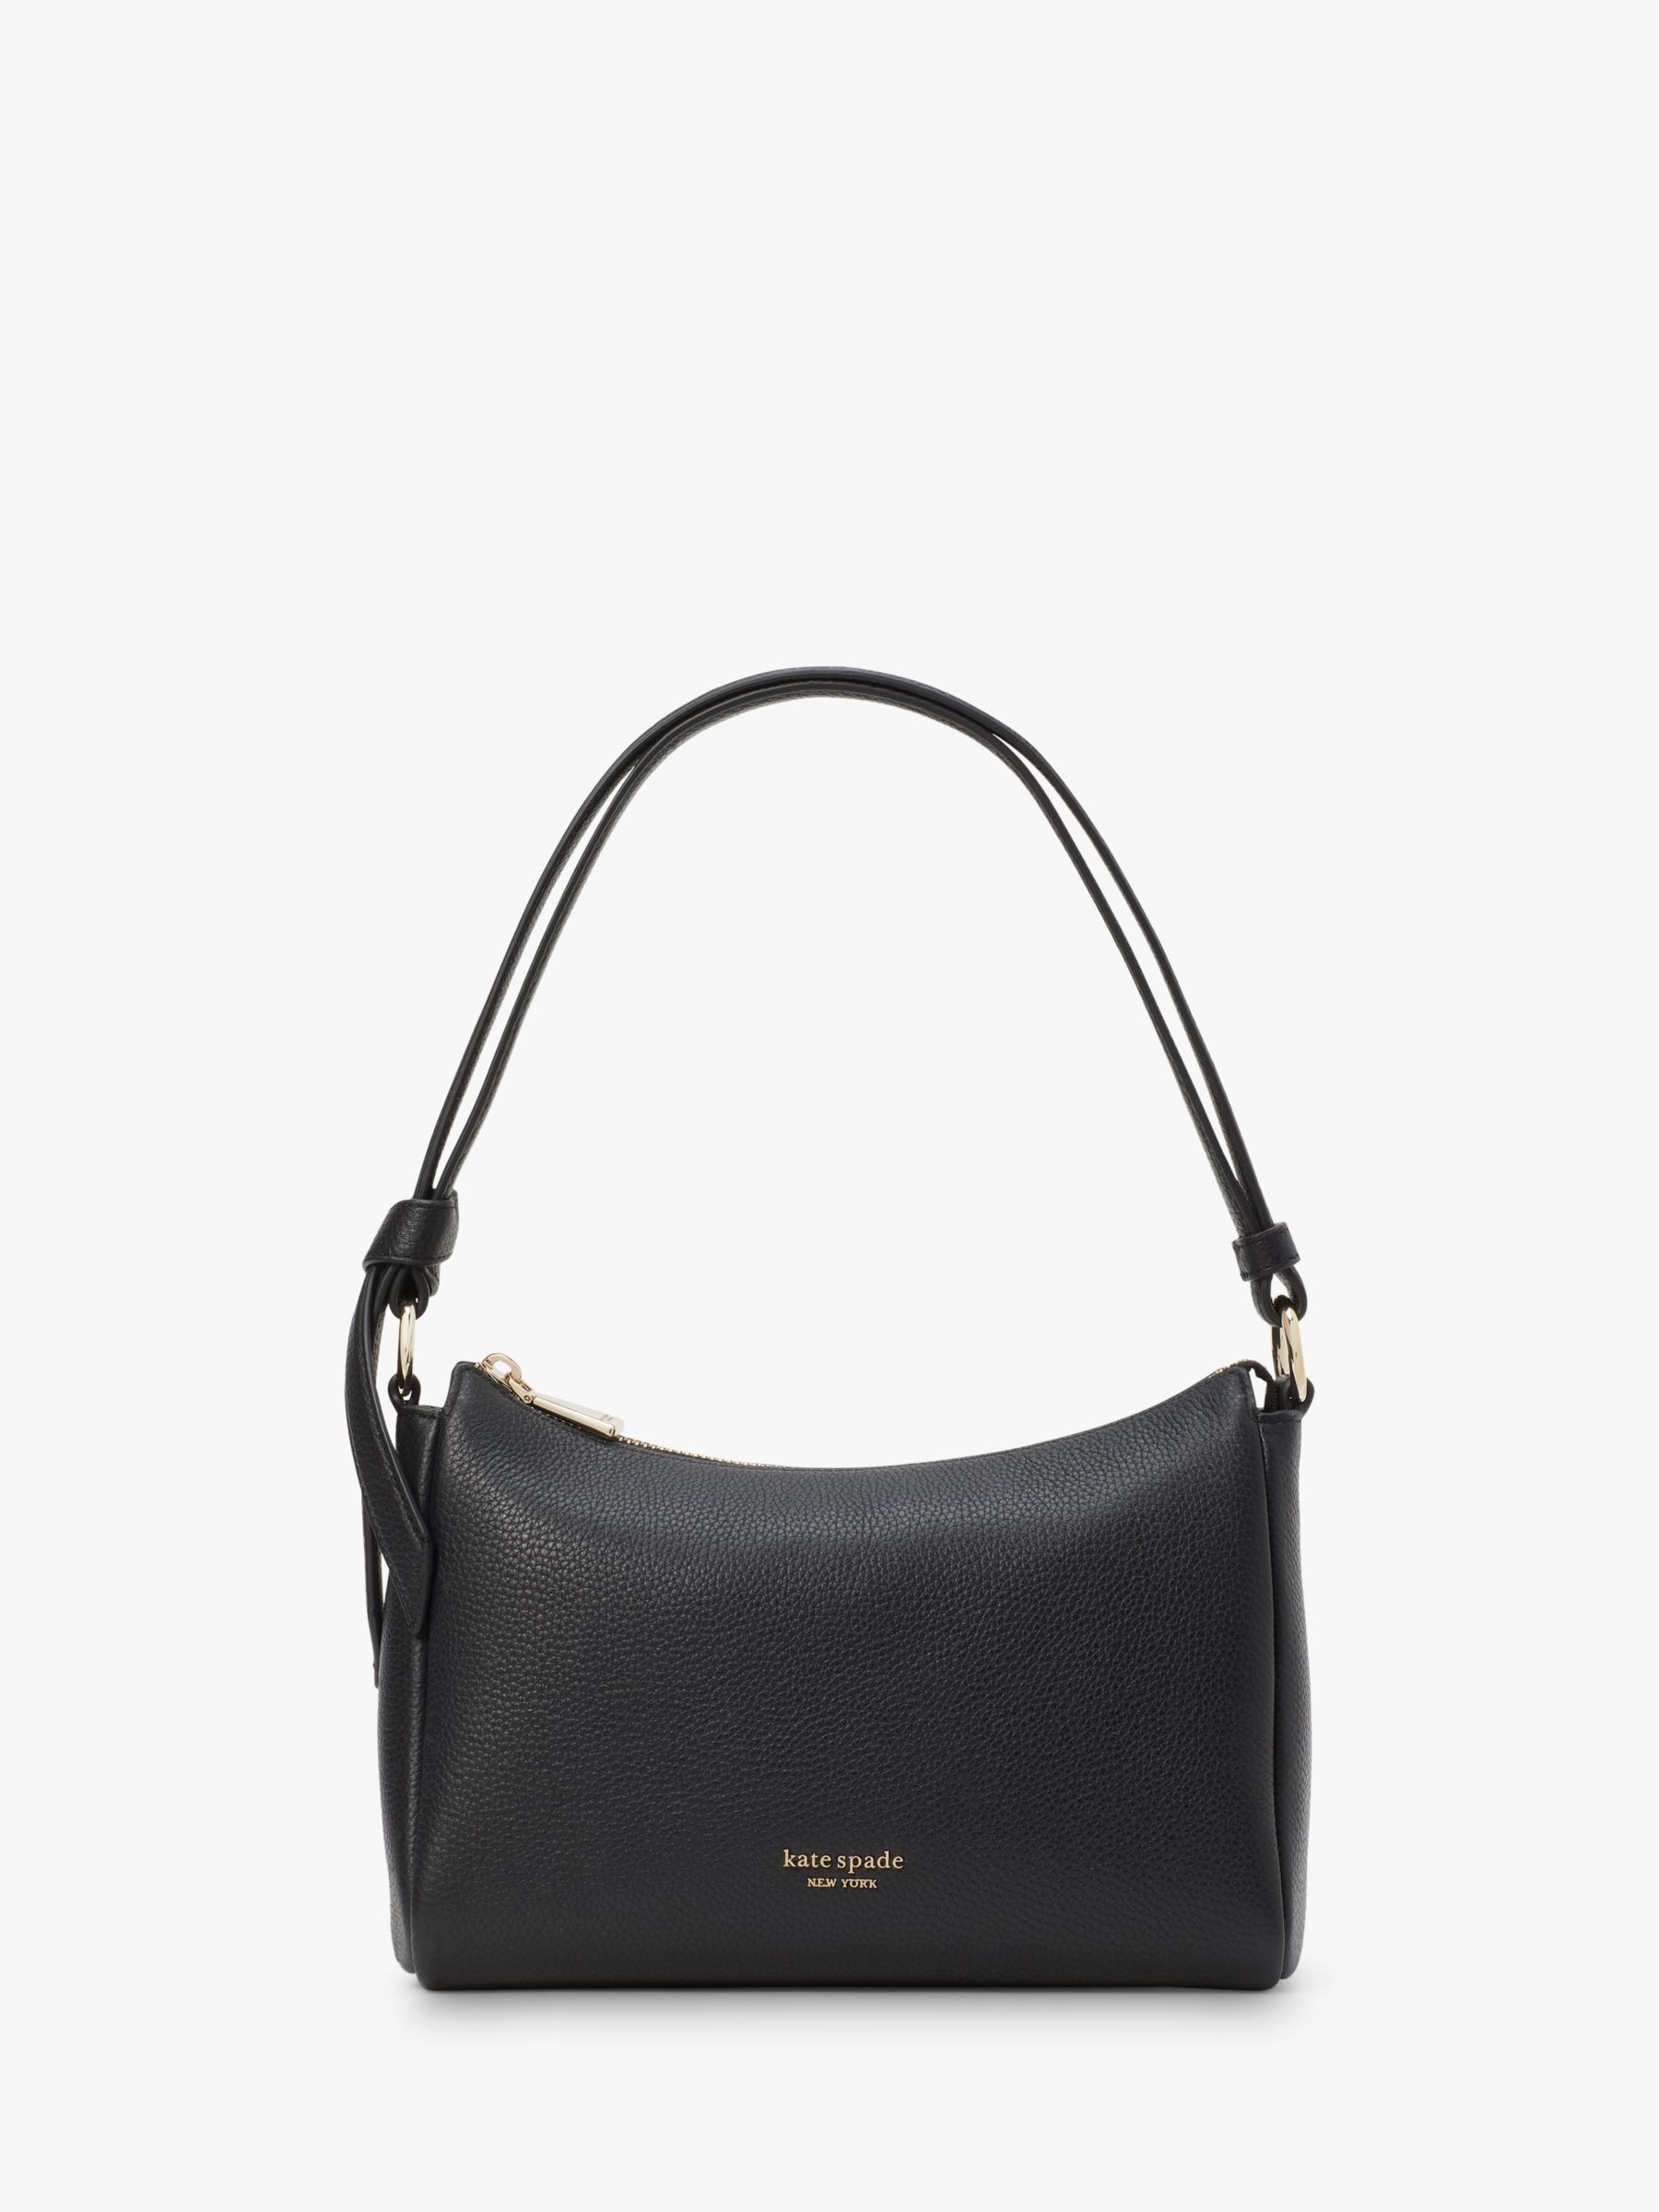 kate spade new york Hudson Leather Convertible Cross Body Bag, Parchment at  John Lewis & Partners